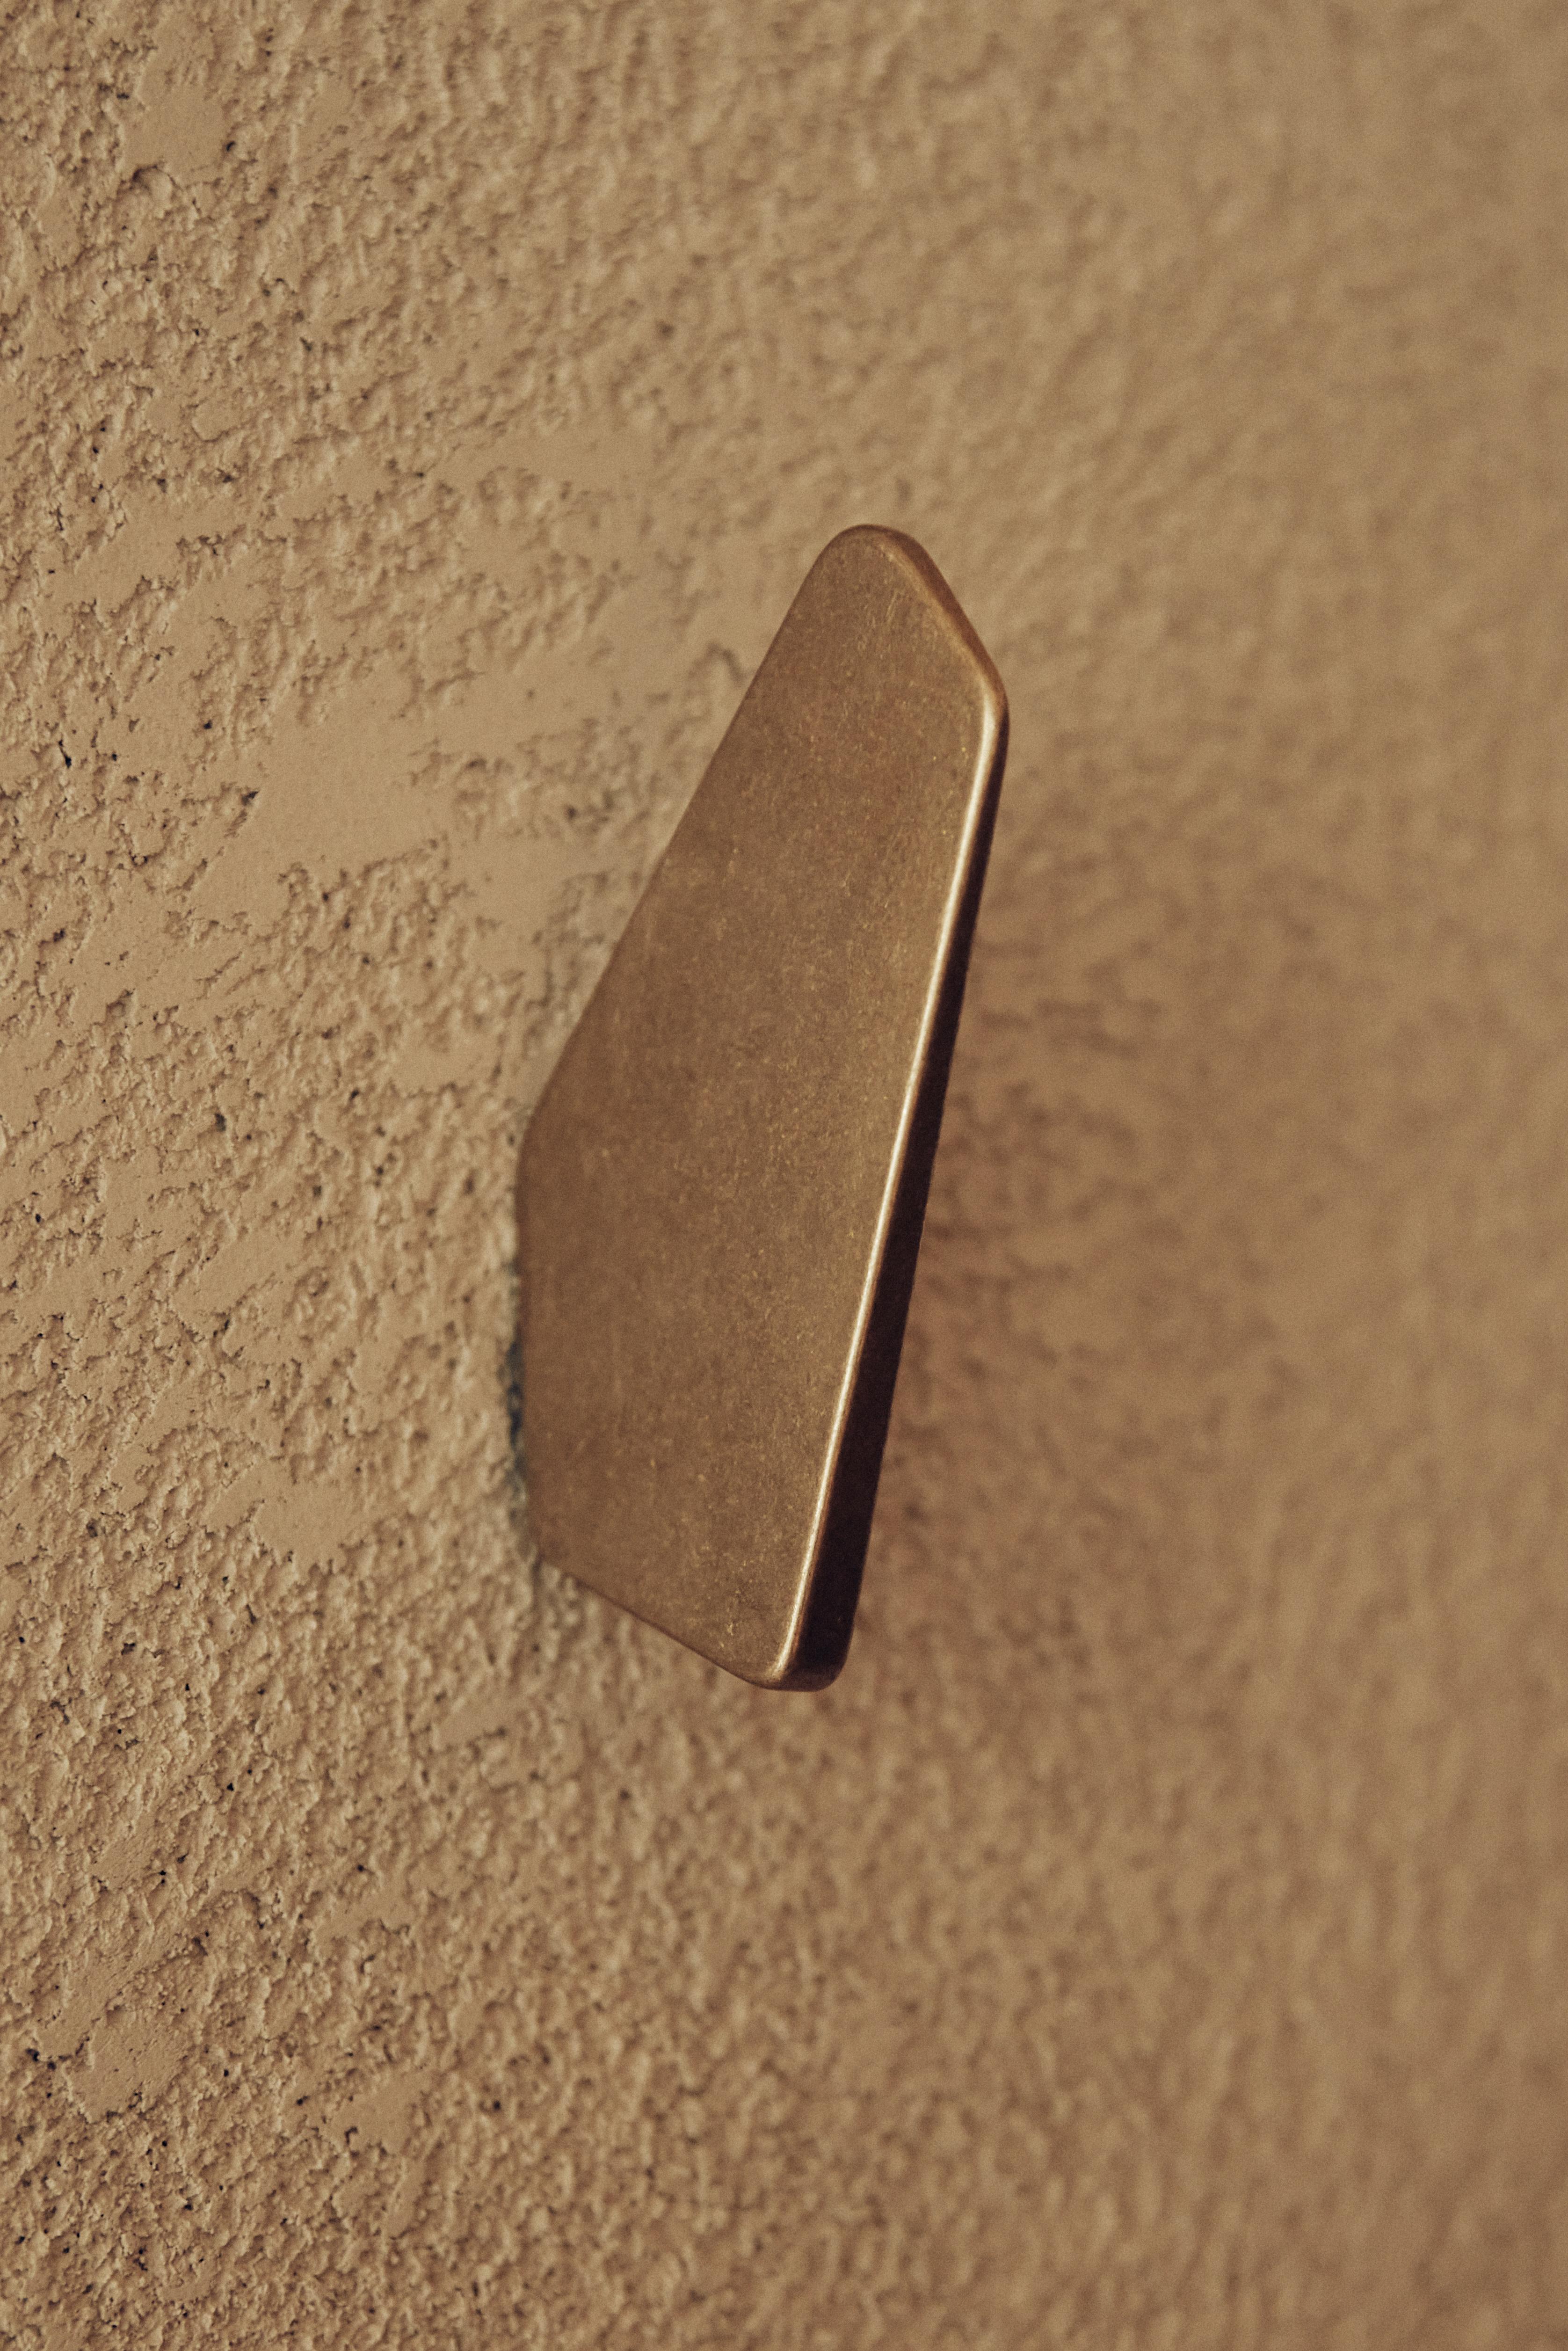 Brass Gio Hook by Henry Wilson
Dimensions: W 2 x D 8 x H 12 cm
Materials: Brass
Note: Hooks come with matching screws.

The Gio Hook is sand cast in solid brass. Named after Signor Ponti, forever an inspiration.

Our Hooks are manufactured in small